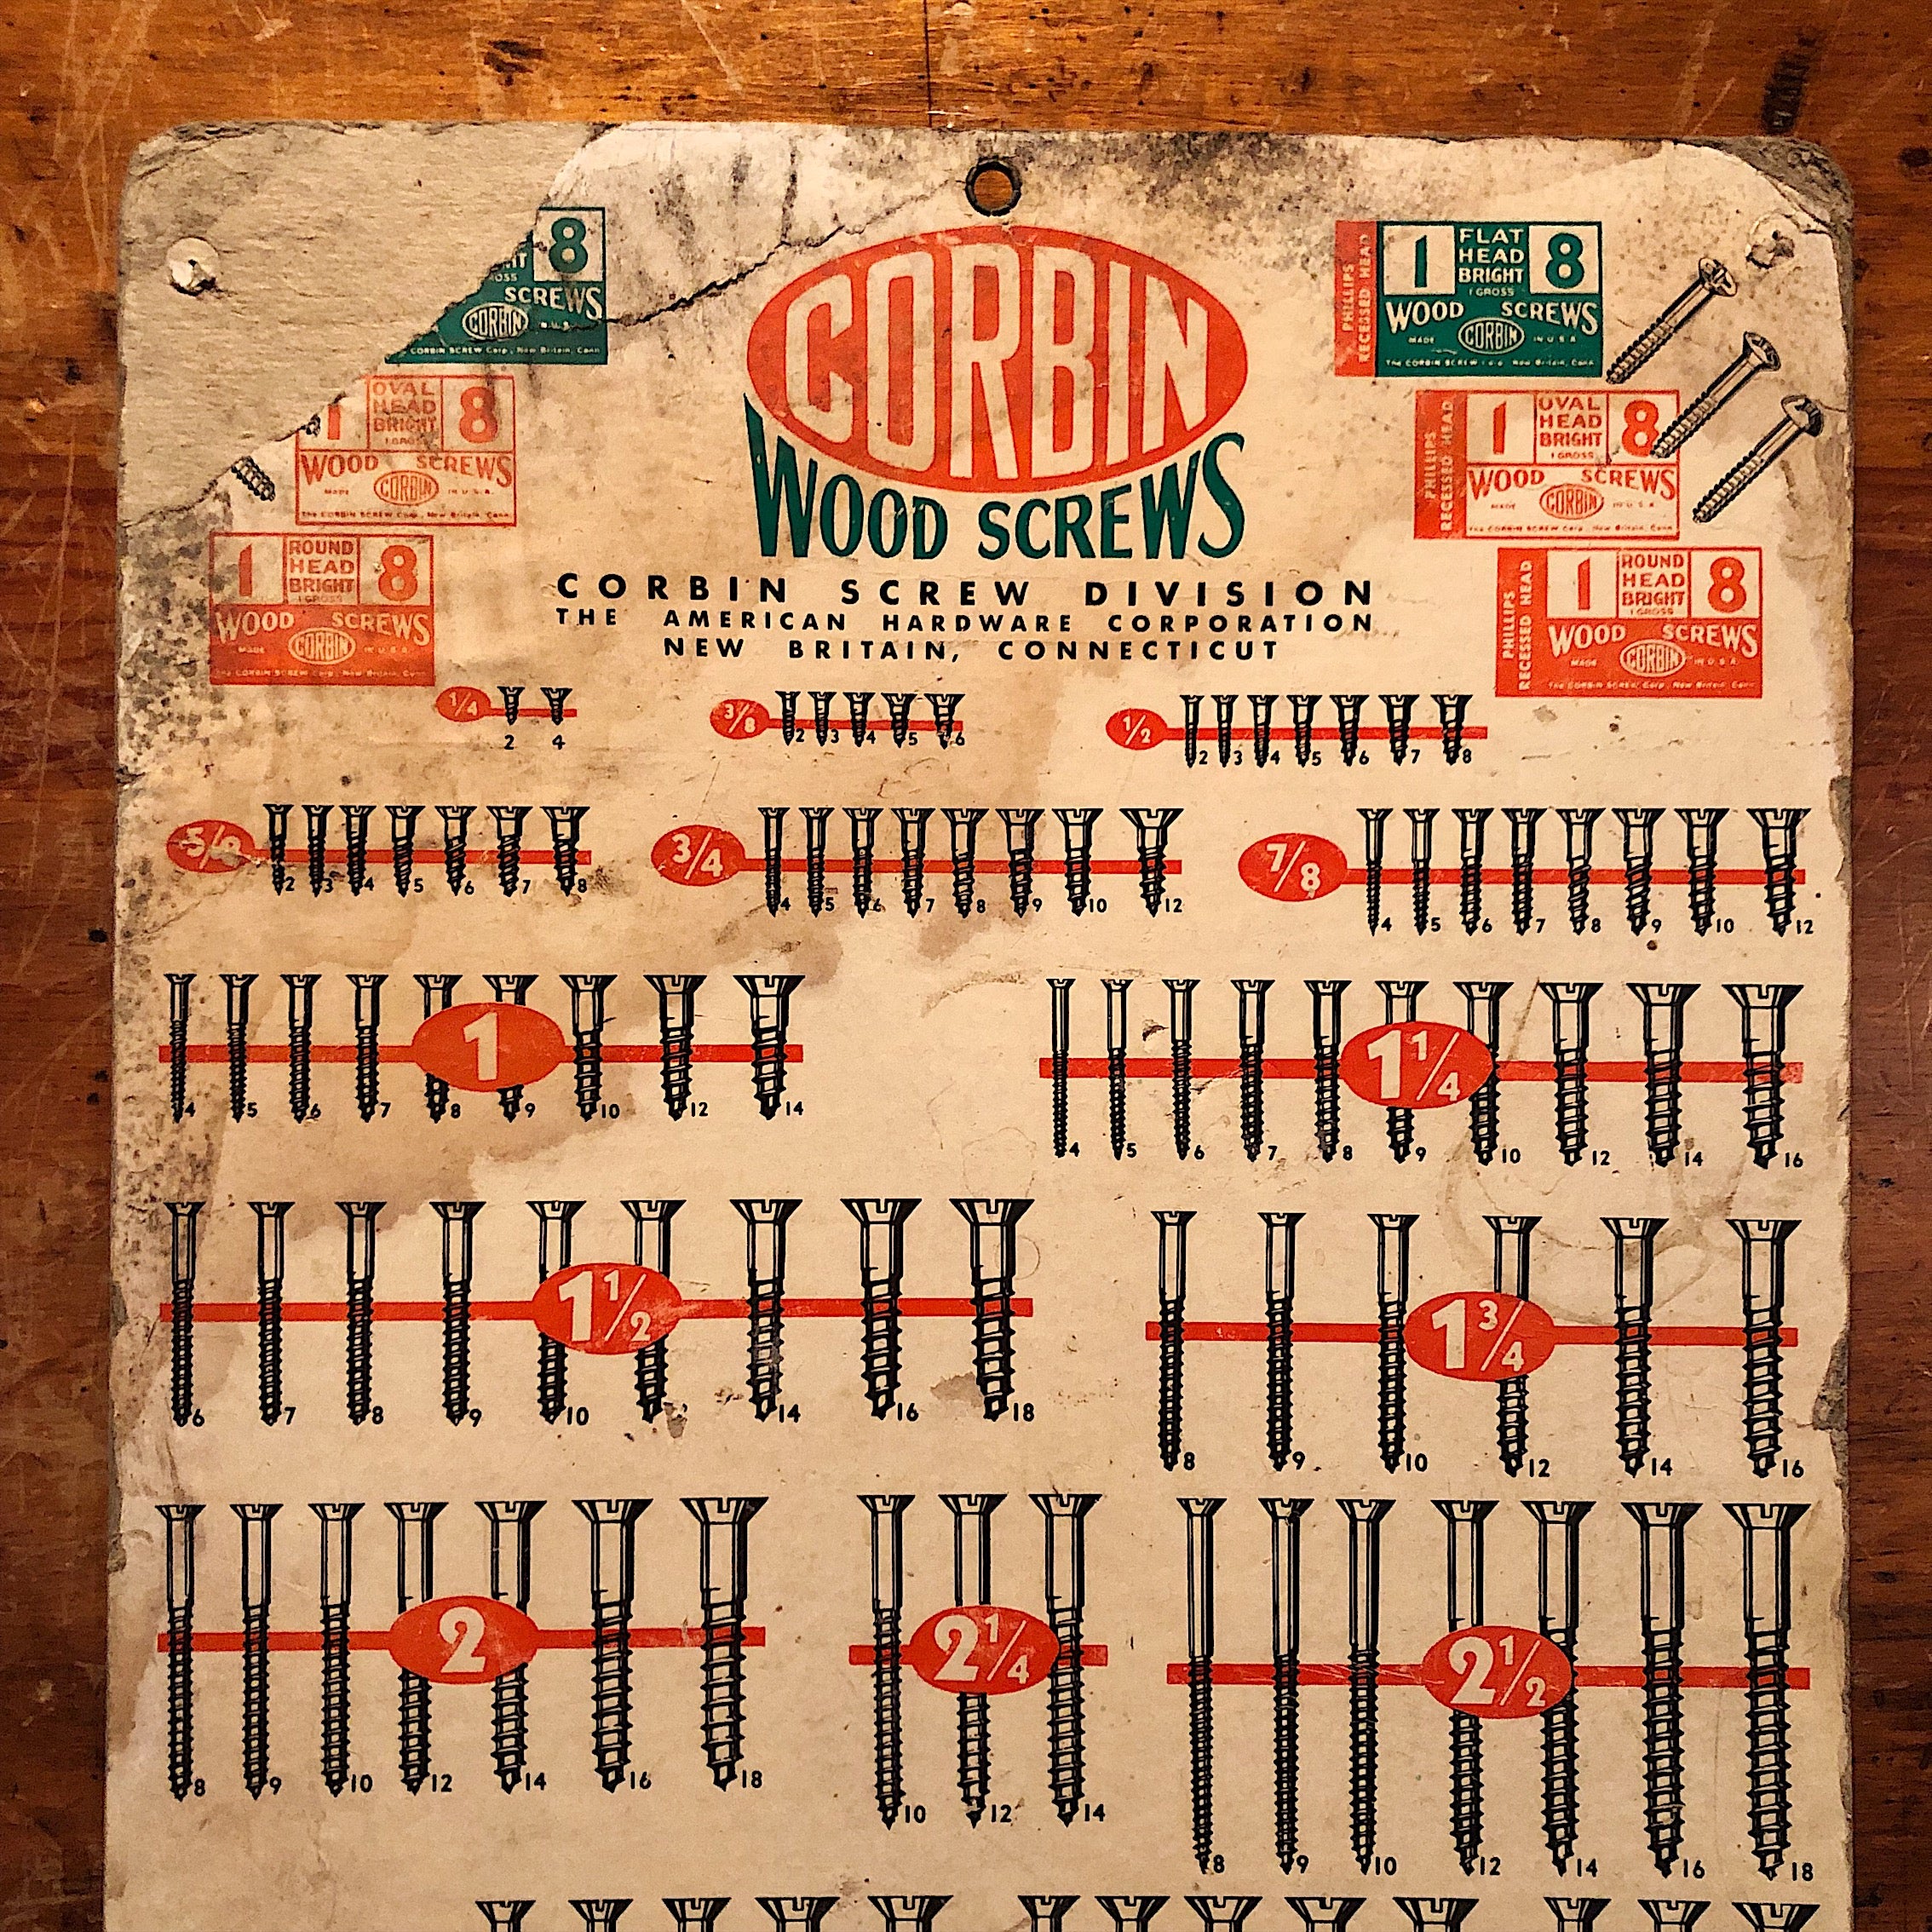 Rare Corbin Hardware Lithograph - Double sided - Wood Screws Stove Bolts - Reference Poster - Vintage Industrial Wall Decor - 1950s?